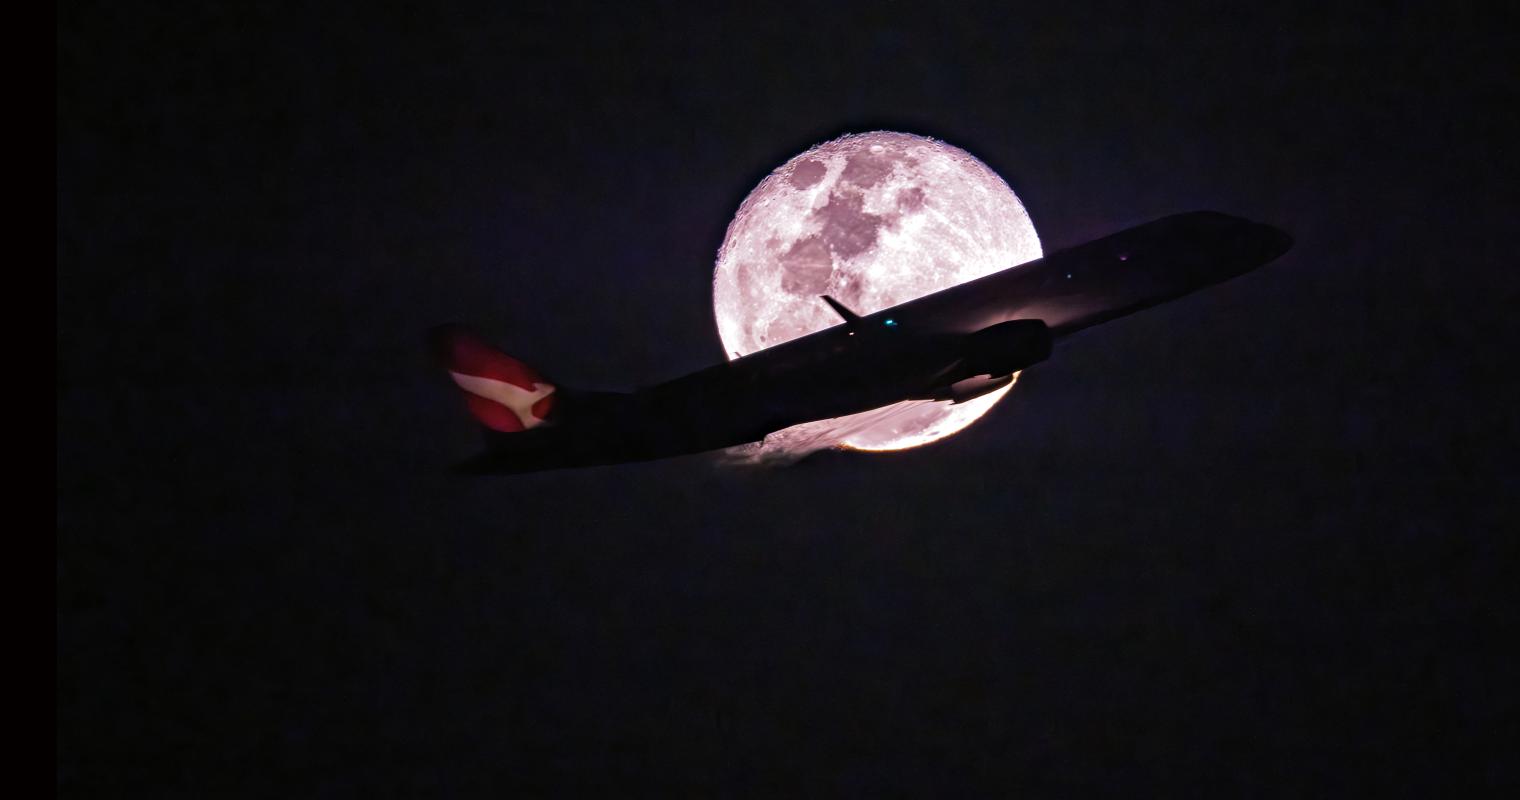 image of a plane flying in front of the moon at night